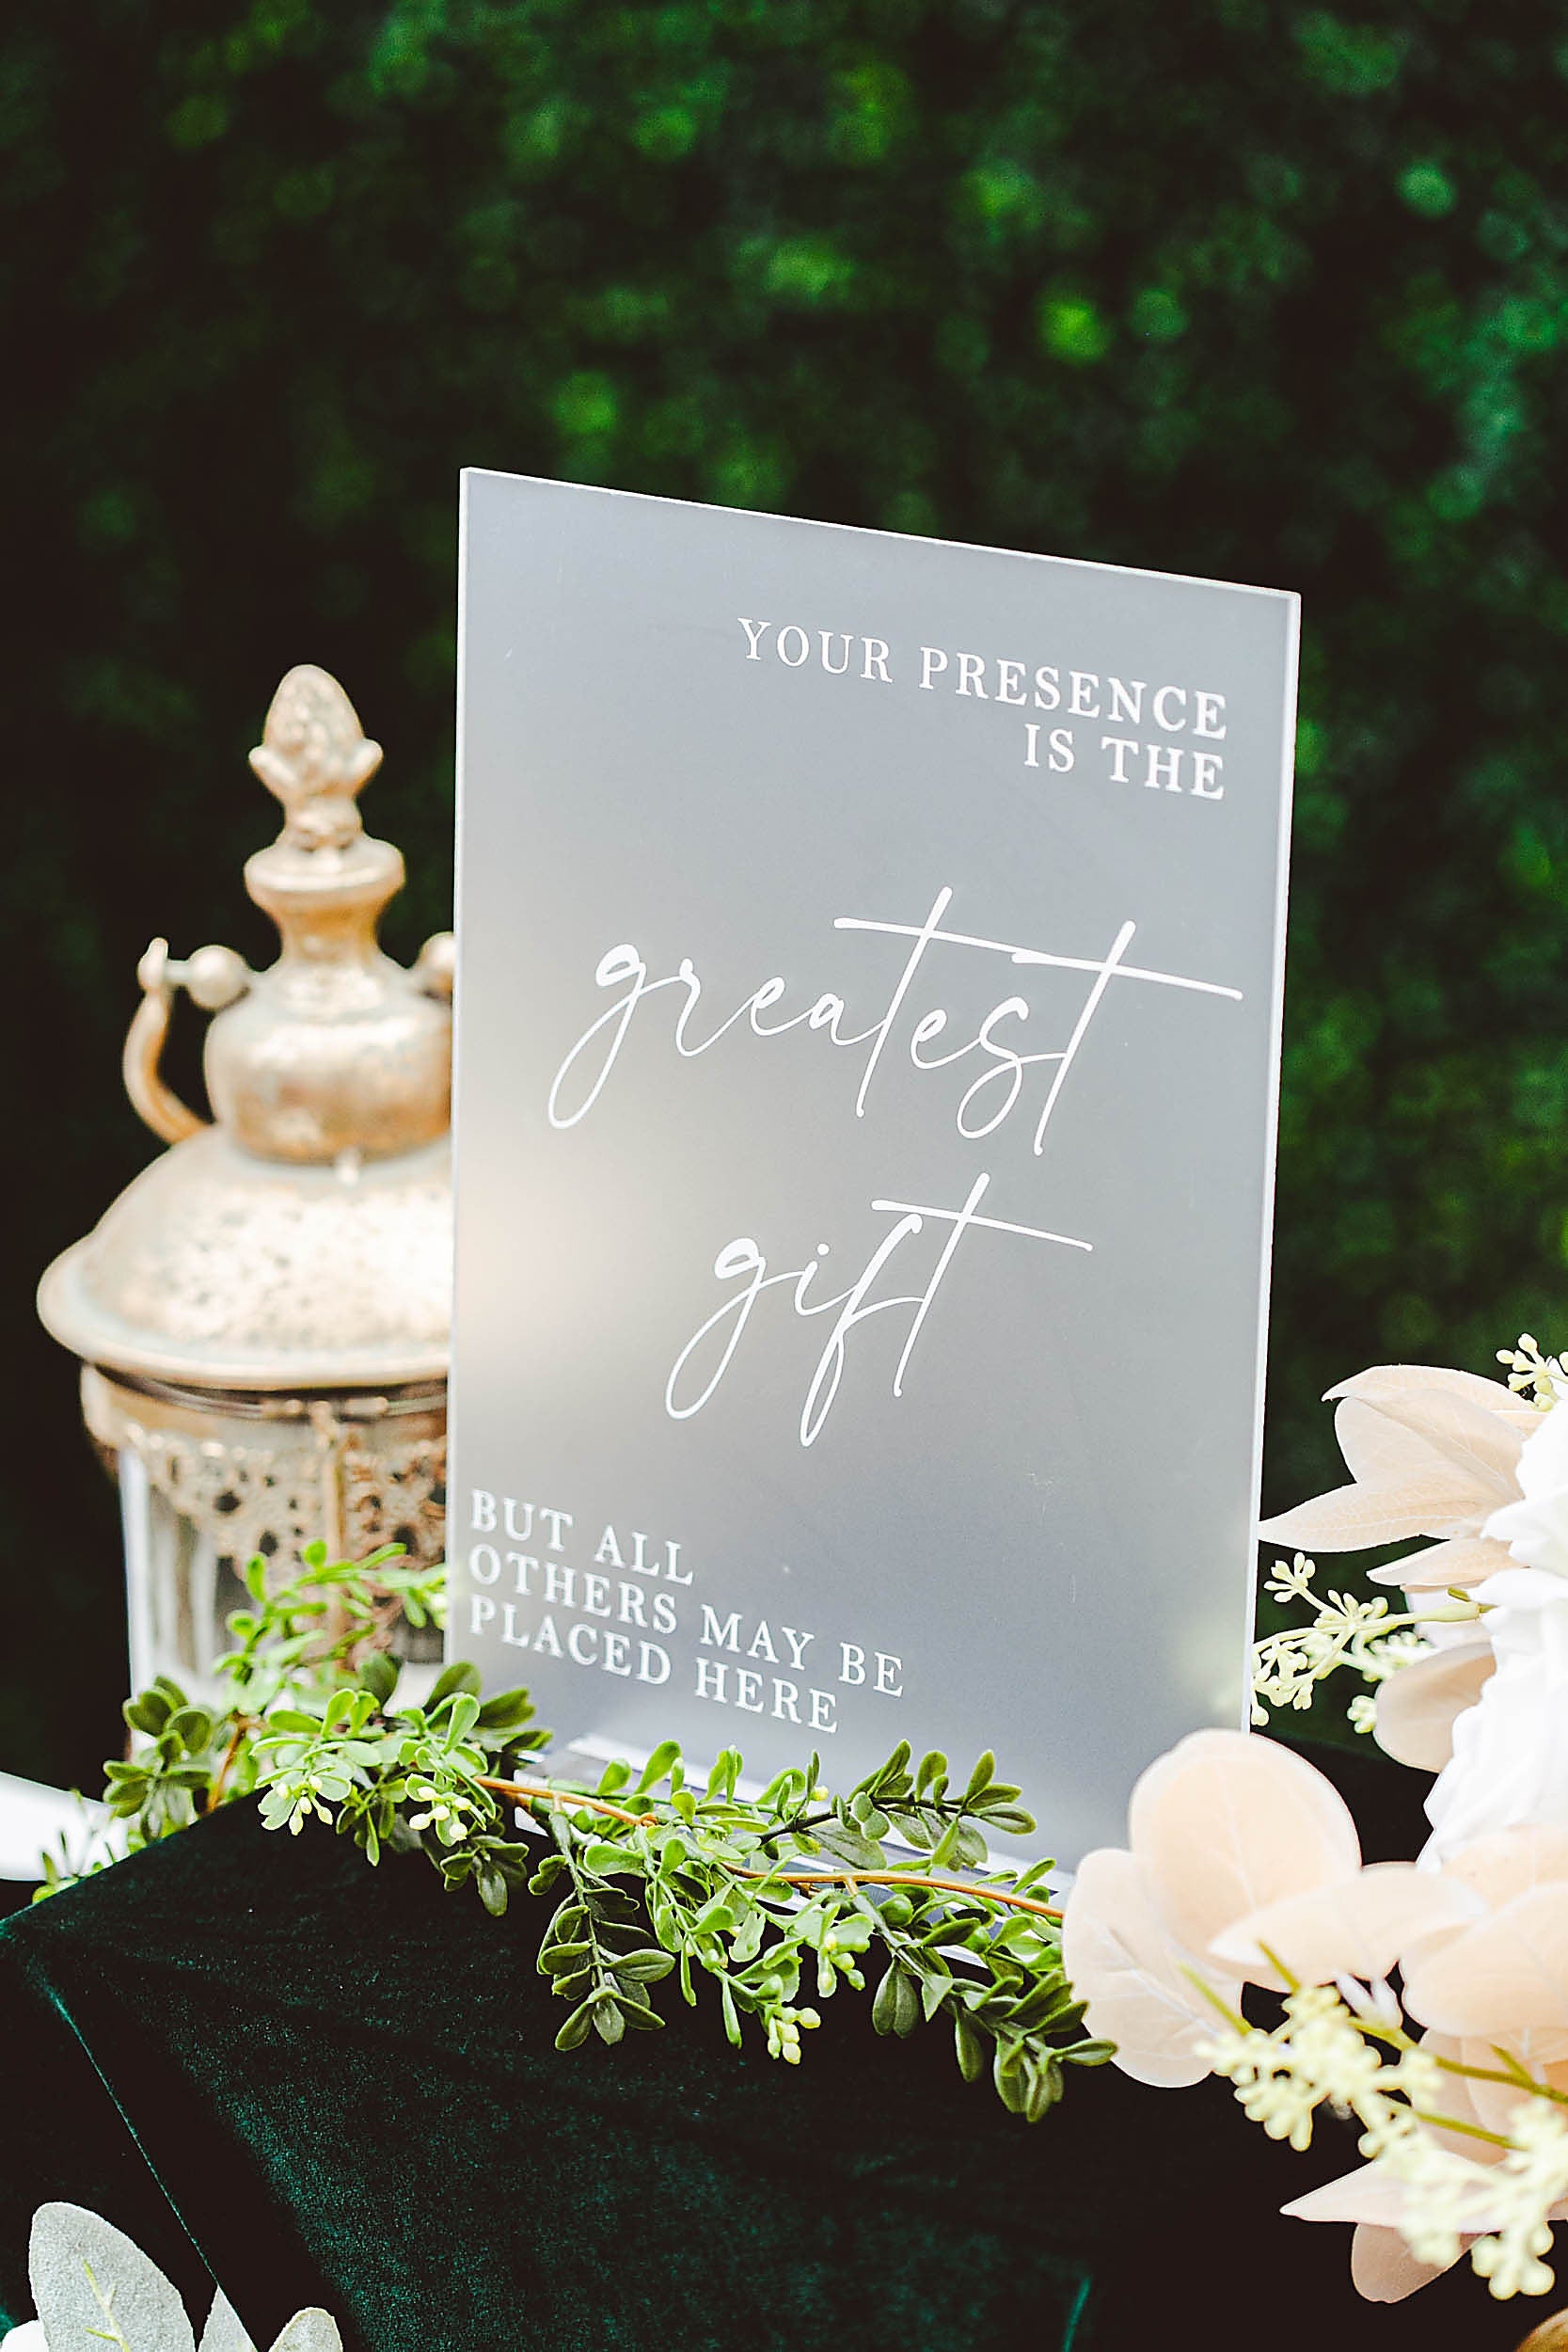 Your Presence Is Our Greatest Gift S1-AS14